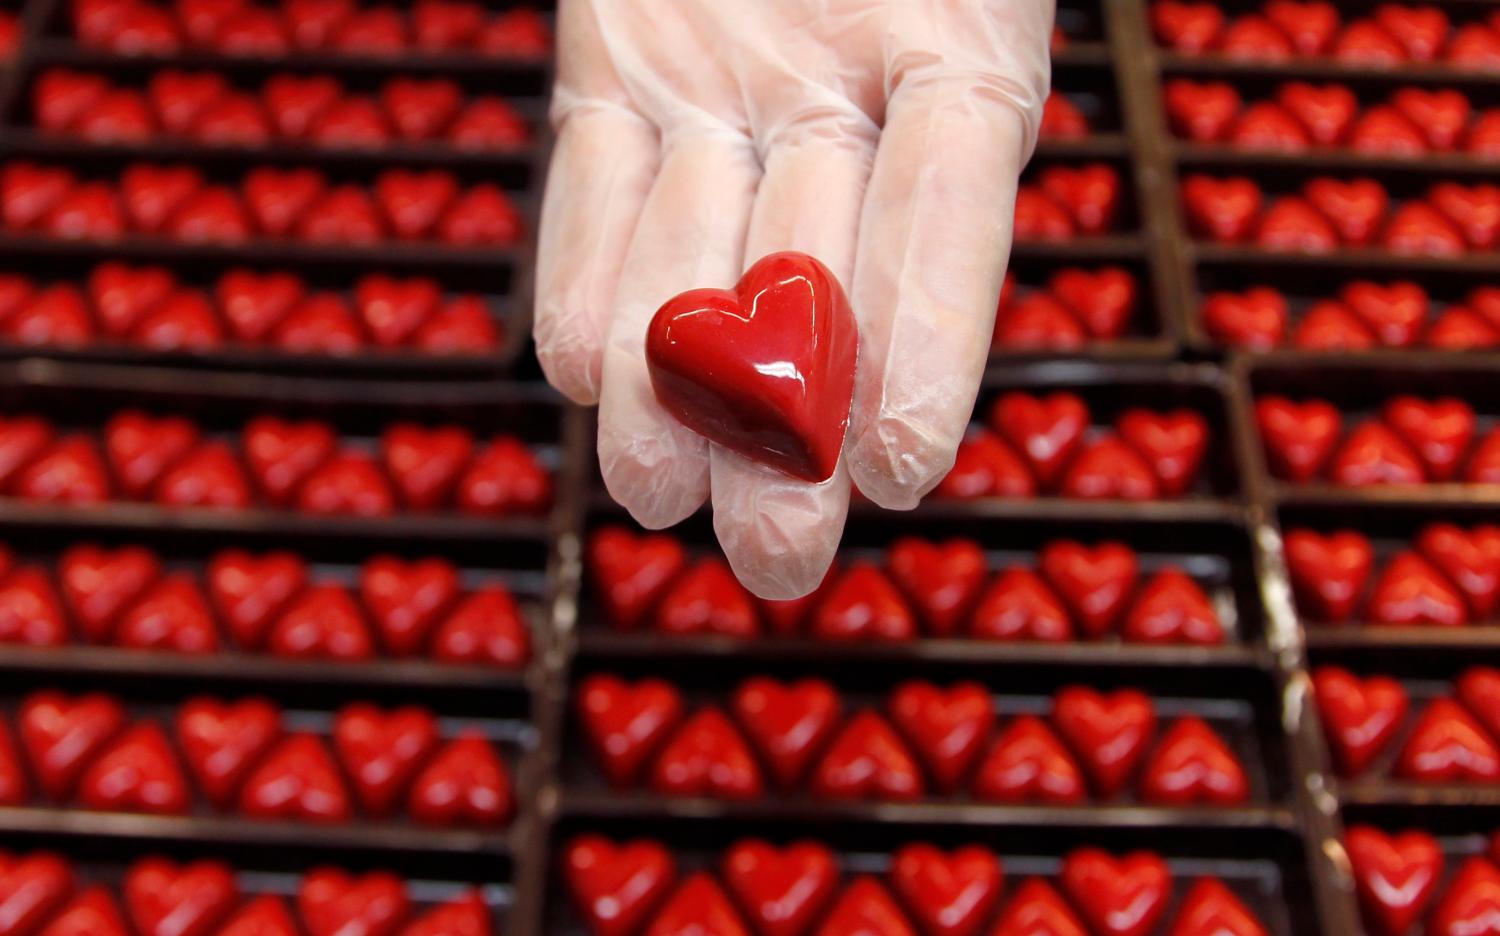 A worker displays a heart-shaped praline for Valentine's Day at a Wittamer chocolate boutique in Brussels February 14, 2012. REUTERS/Francois Lenoir (BELGIUM - Tags: FOOD SOCIETY) - GM1E82E1MJI01